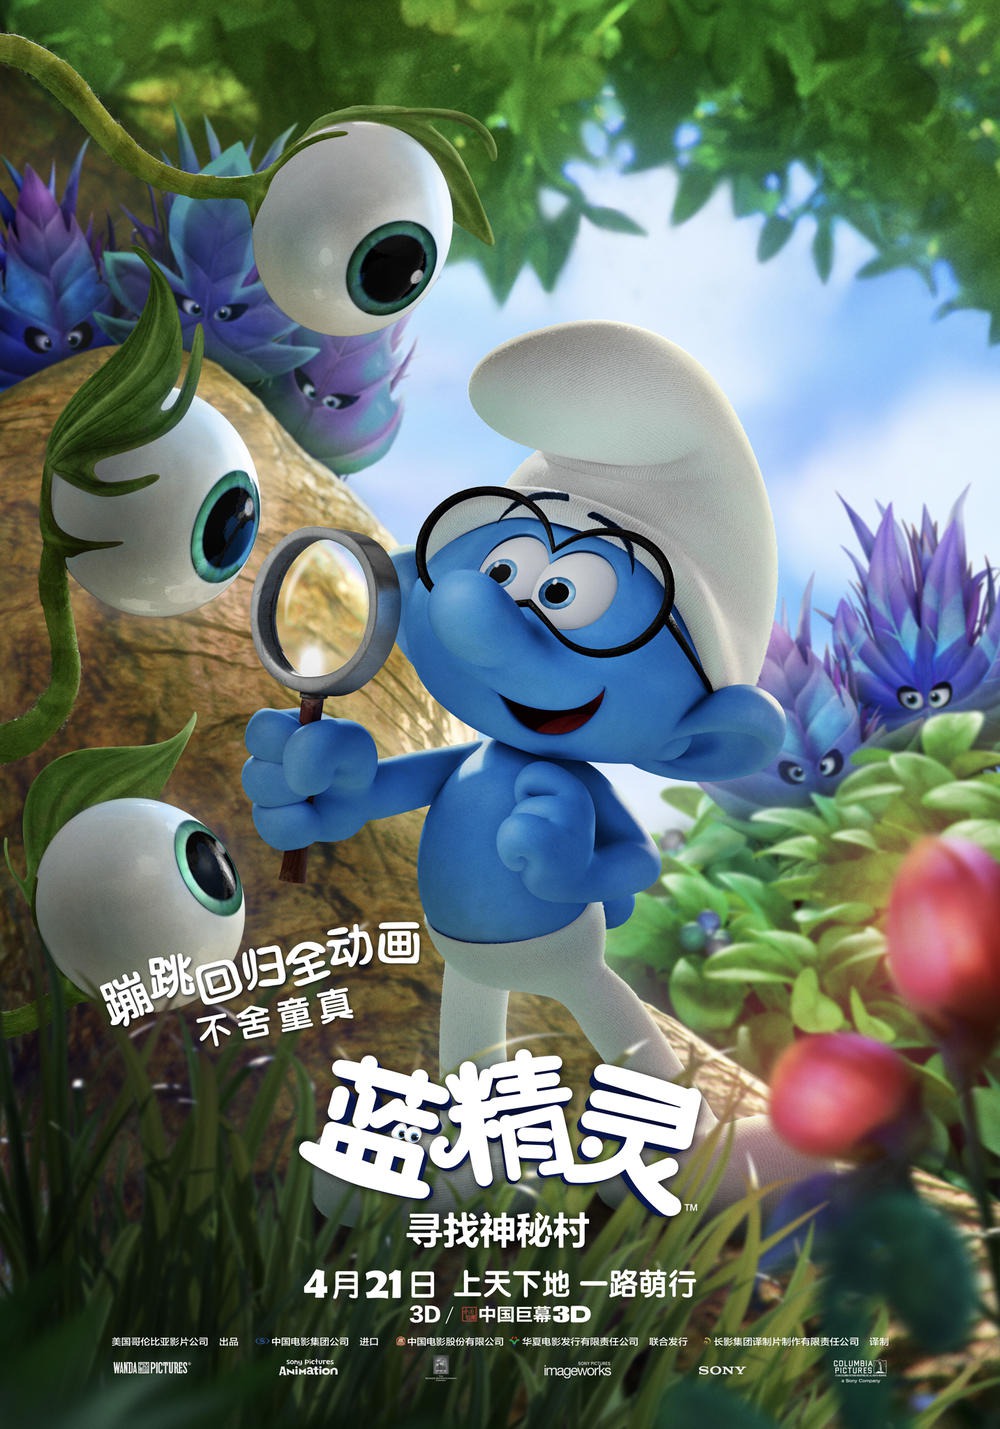 Extra Large Movie Poster Image for Smurfs: The Lost Village (#10 of 13)